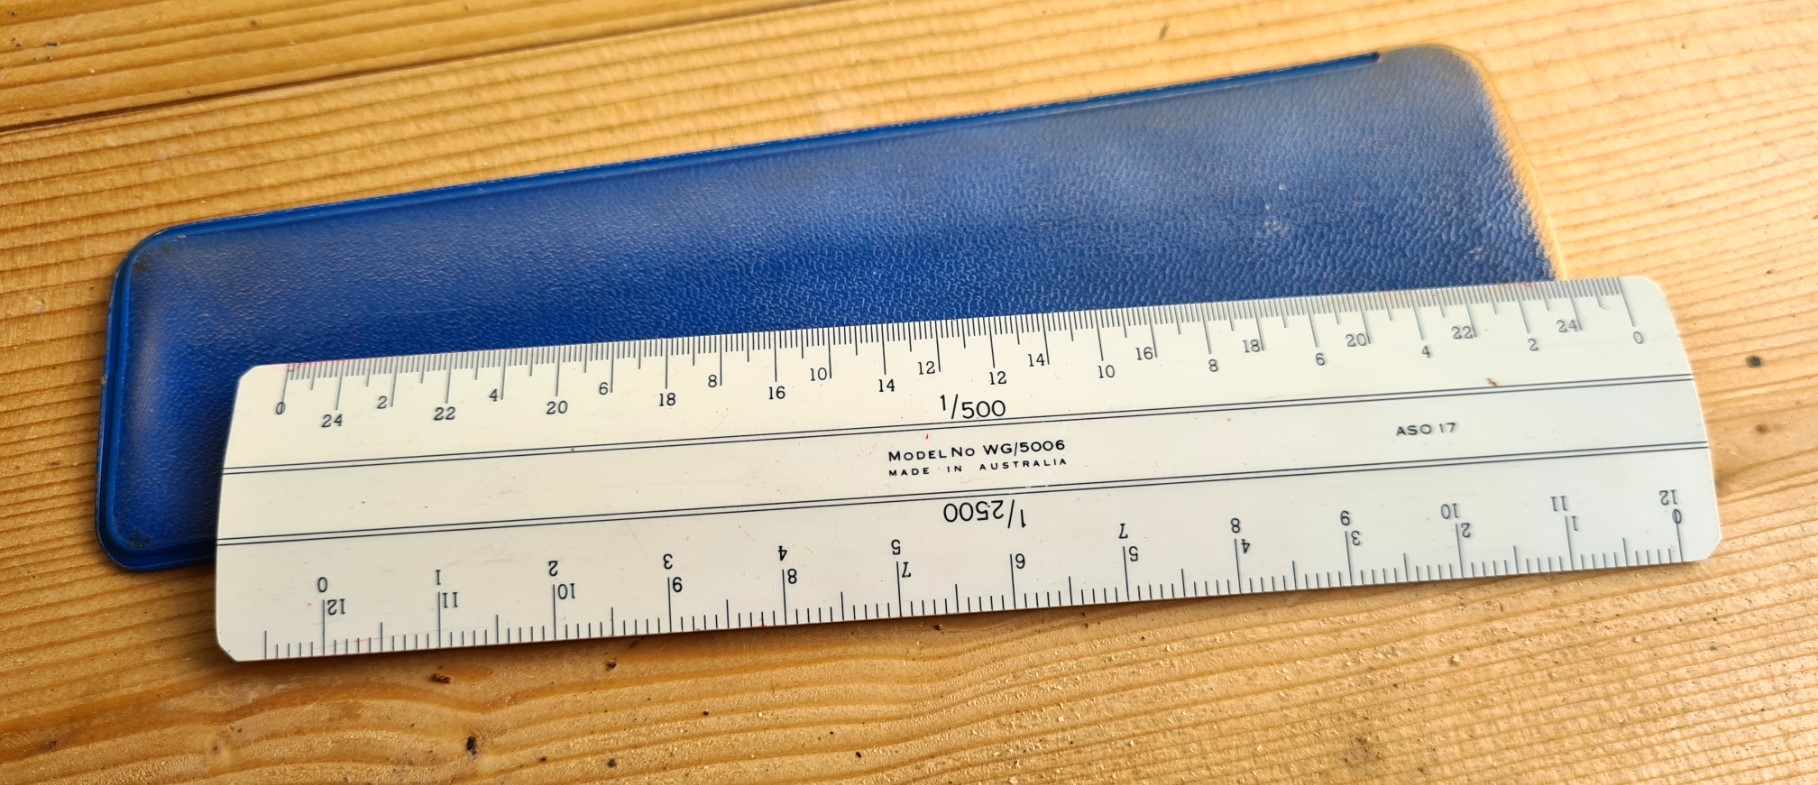 W&G scale rule, with slip case